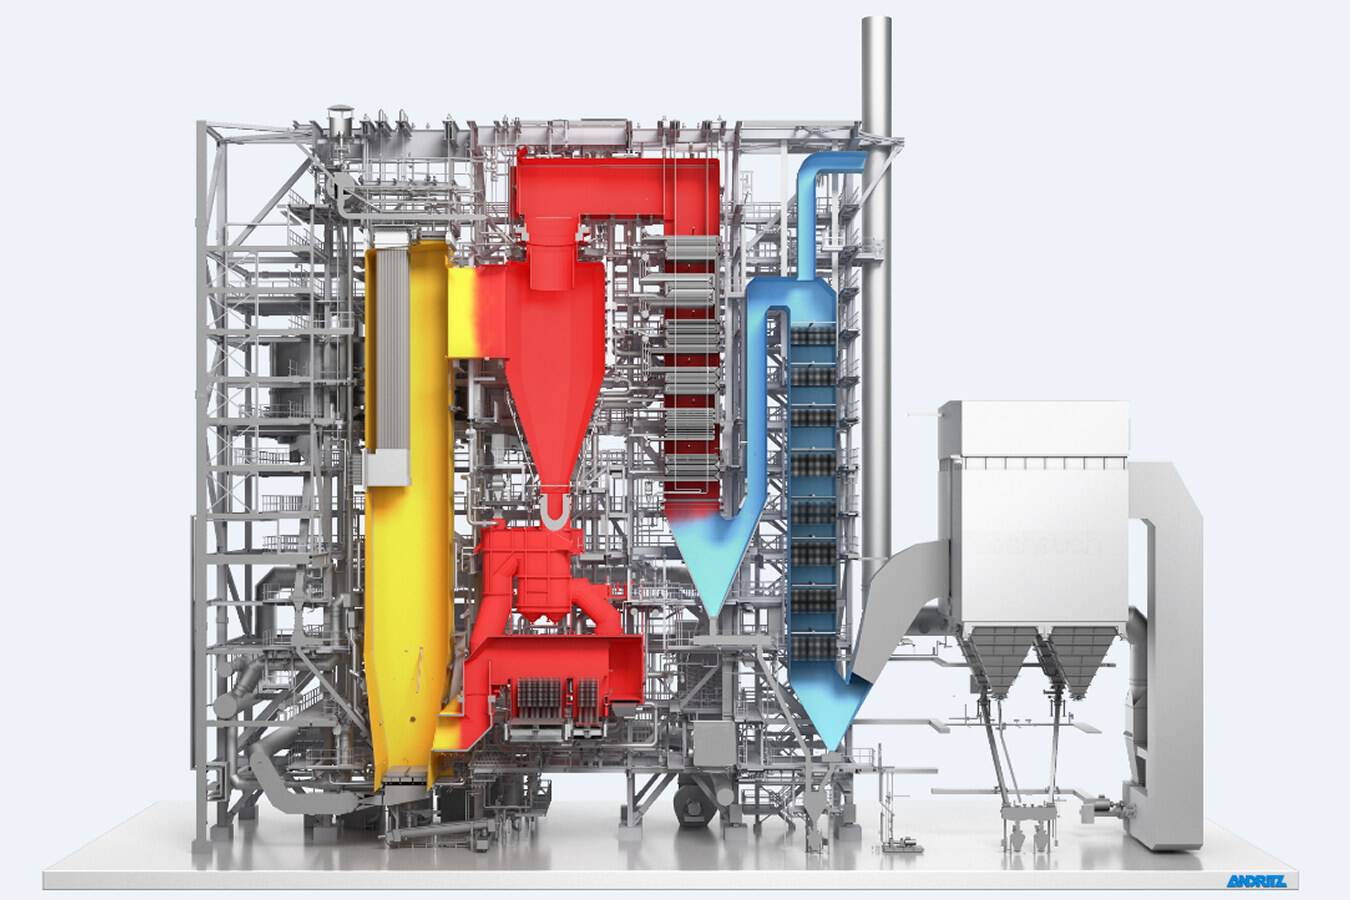 ANDRITZ to supply PowerFluid circulating fluidized bed boiler to Japan International technology group ANDRITZ has received another order from the HITACHI ZOSEN Corporation in Japan to supply a 52.7-MW PowerFluid circulating fluidized bed (CFB) boiler on EPS basis. 